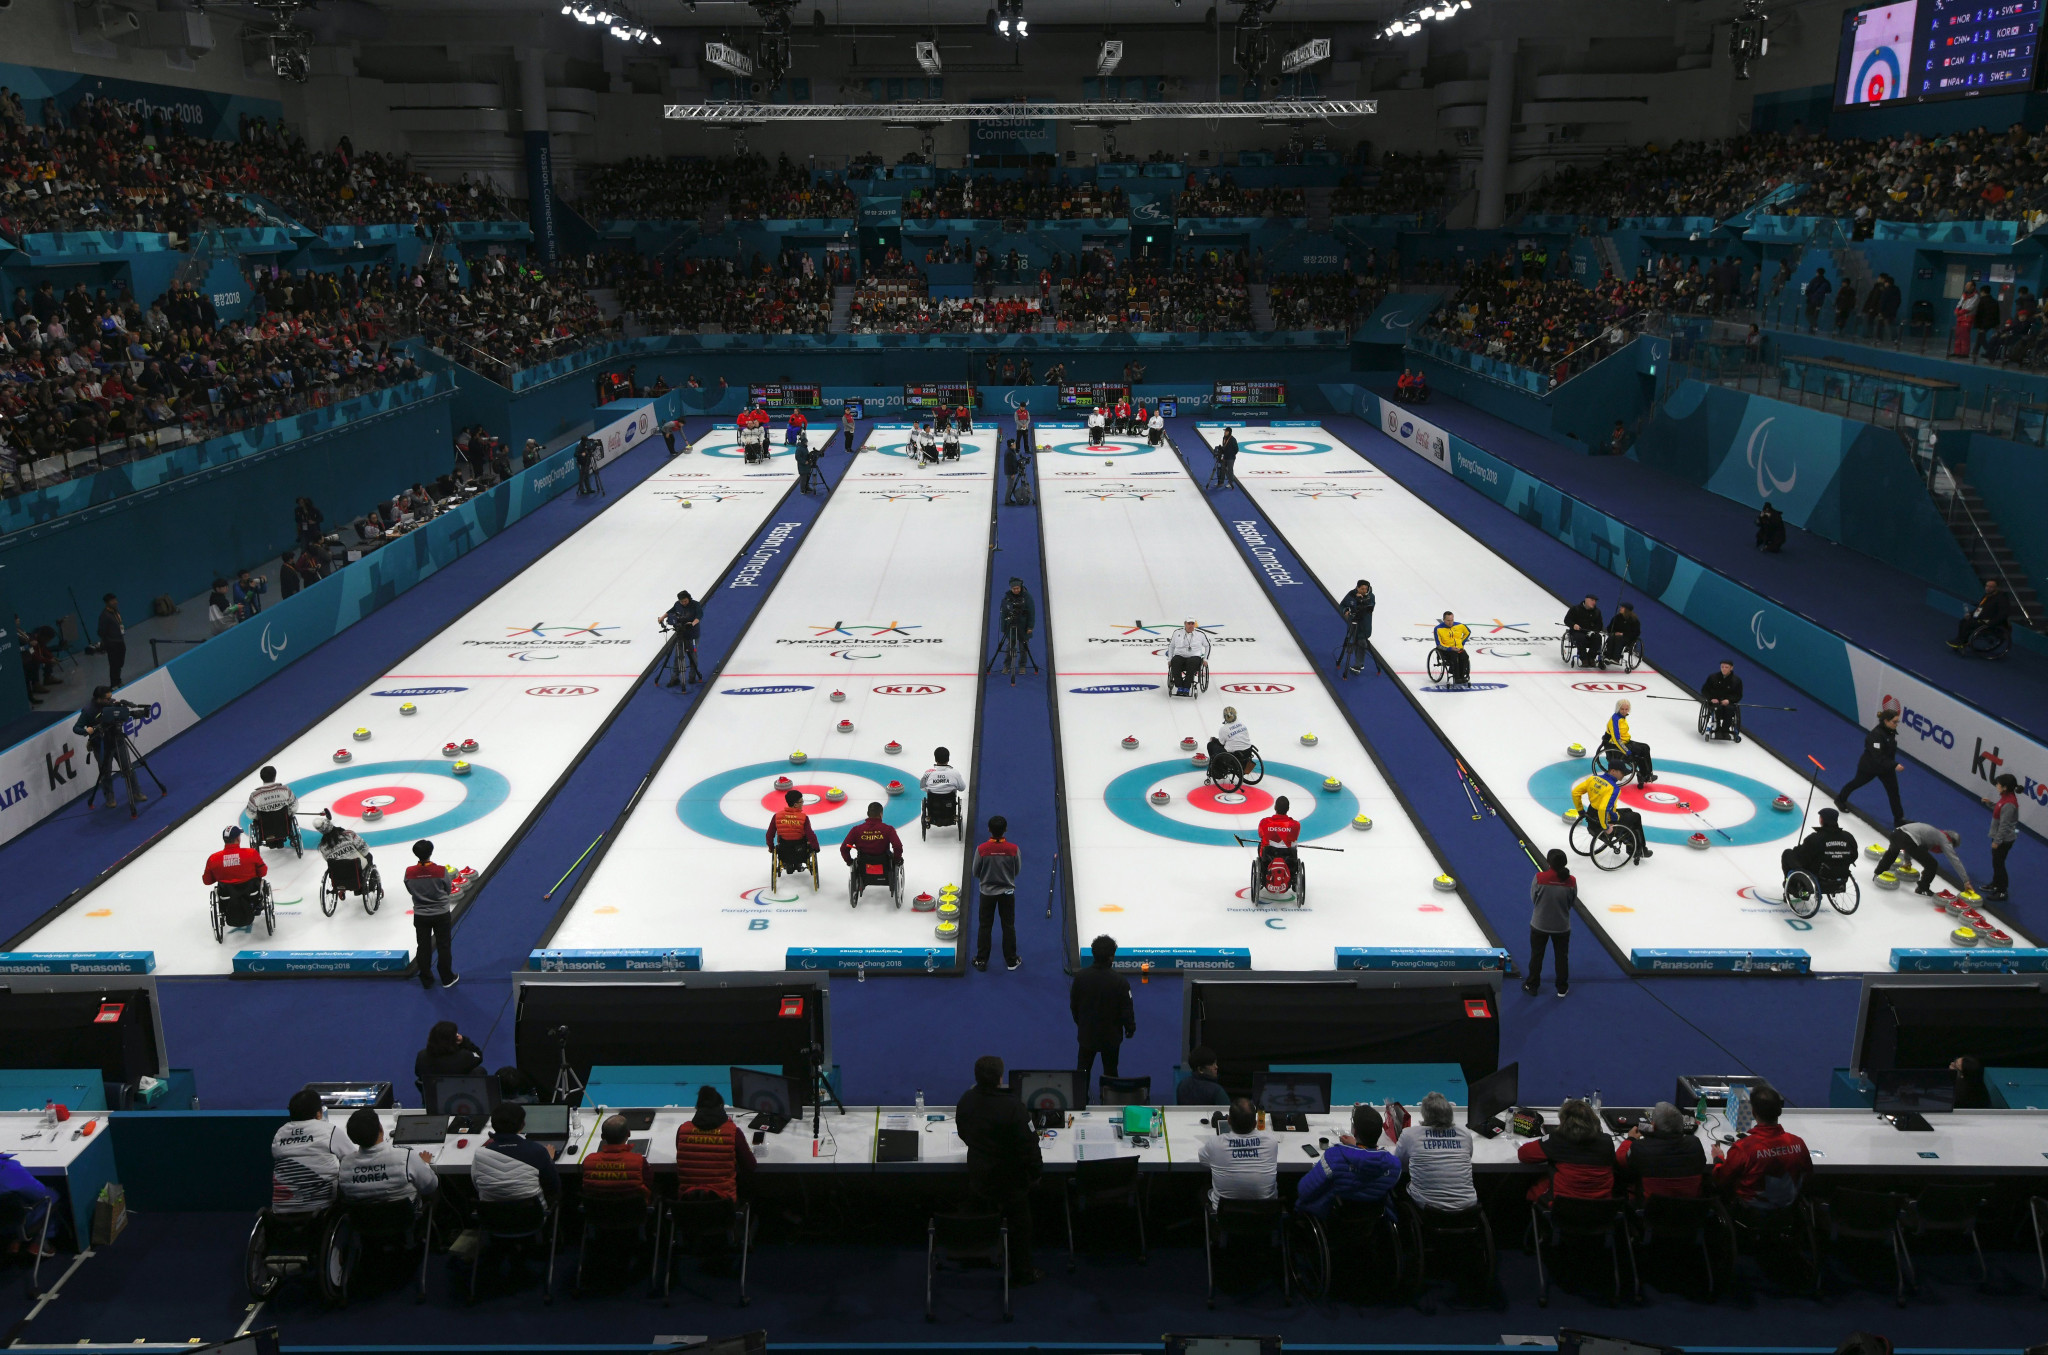 The Gangneung Curling Centre hosted curling competition during the Pyeongchang 2018 Winter Olympics and Paralympics ©Getty Images